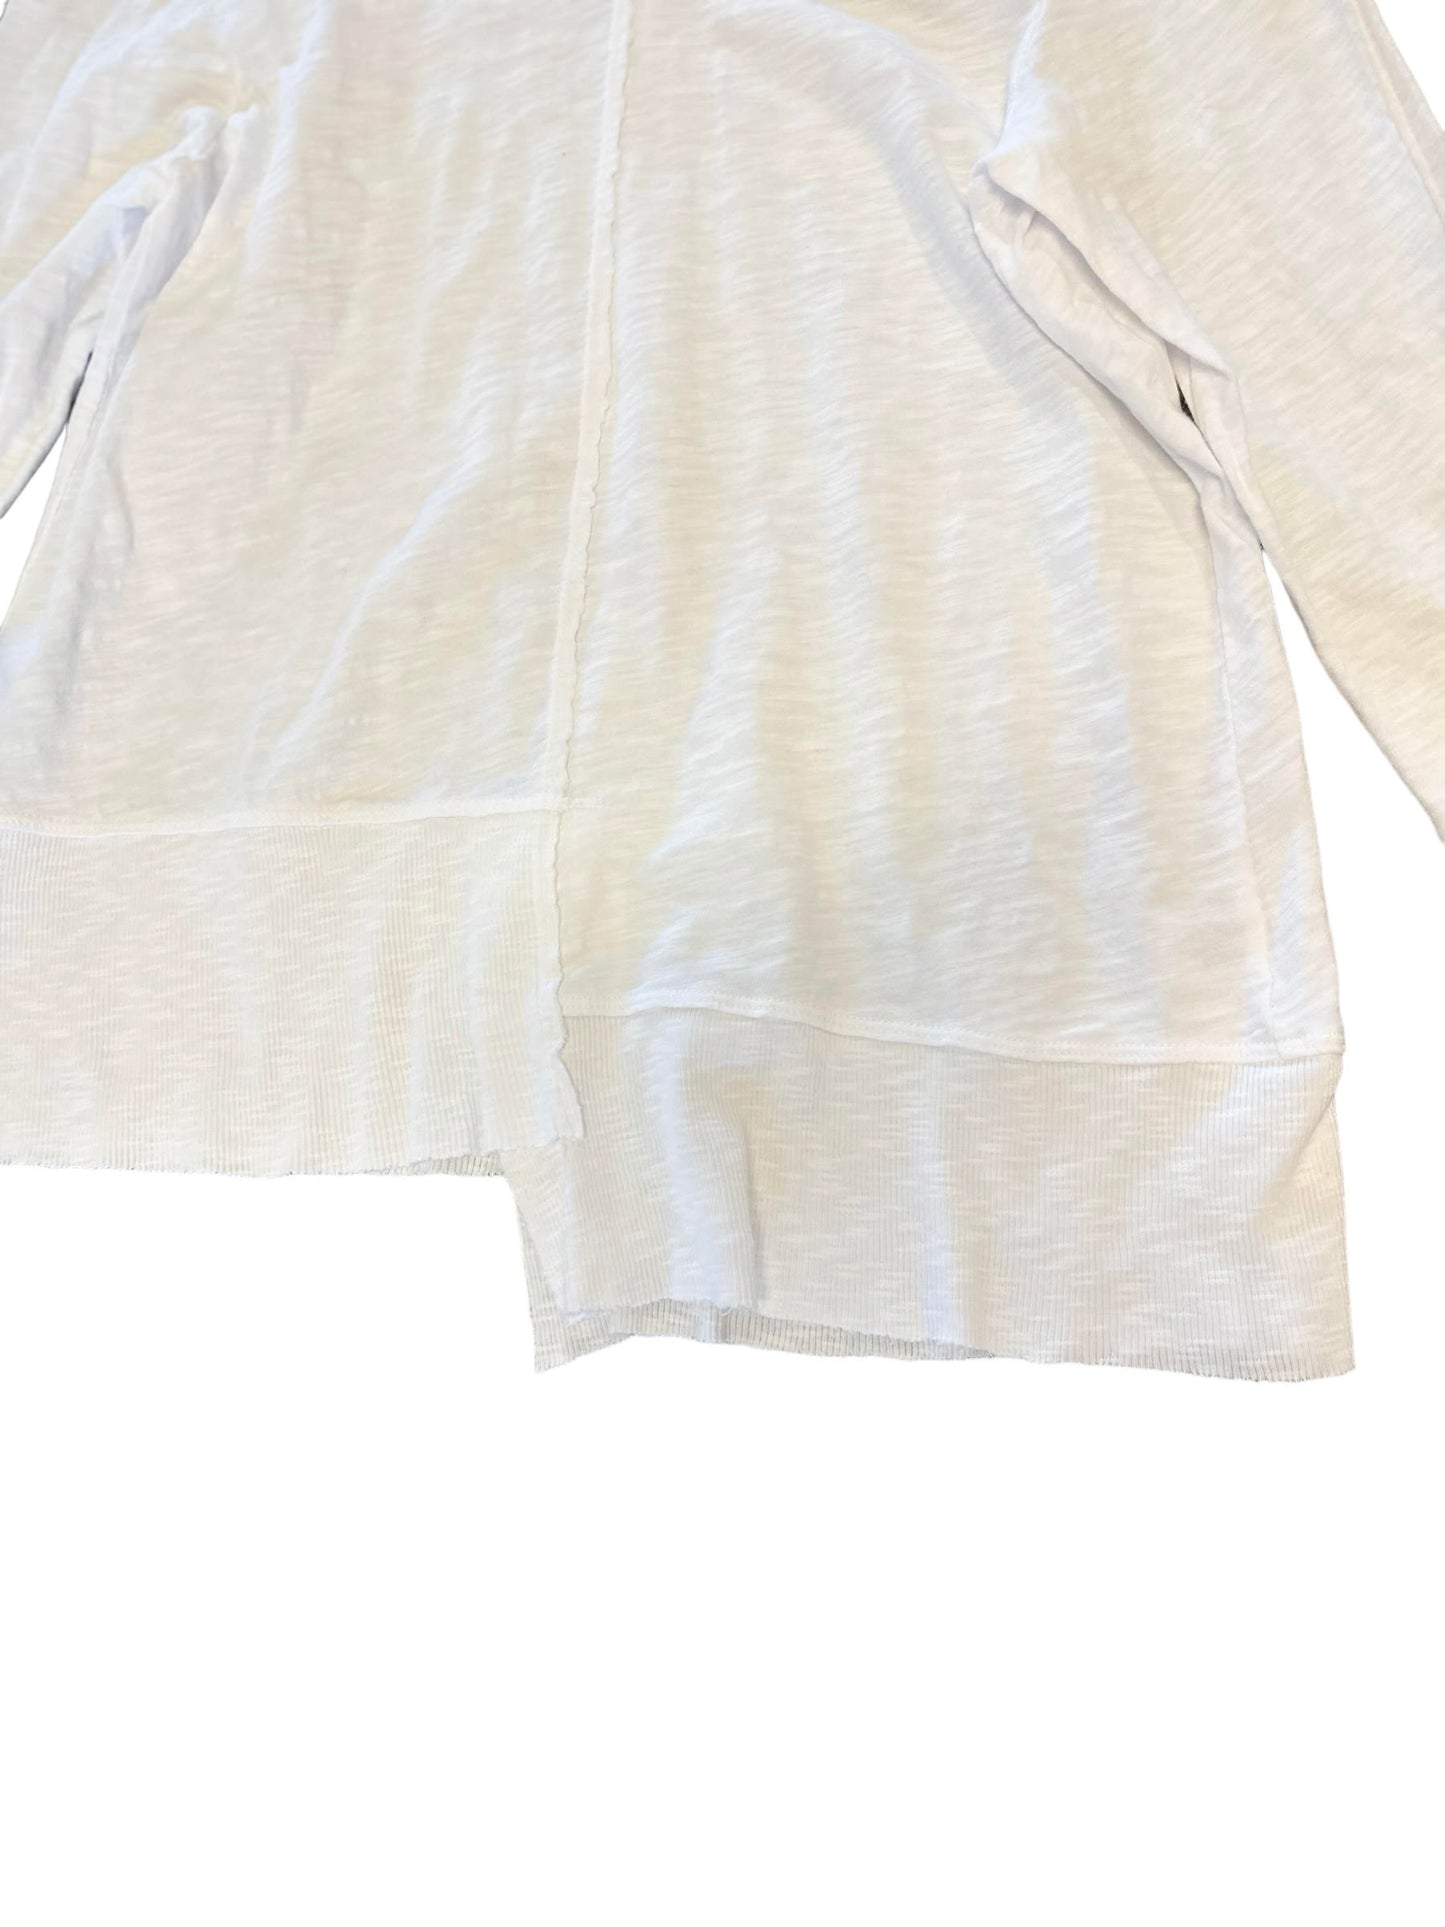 Mix Rib Hem Shifted Long Sleeve Tee in white by Wilt